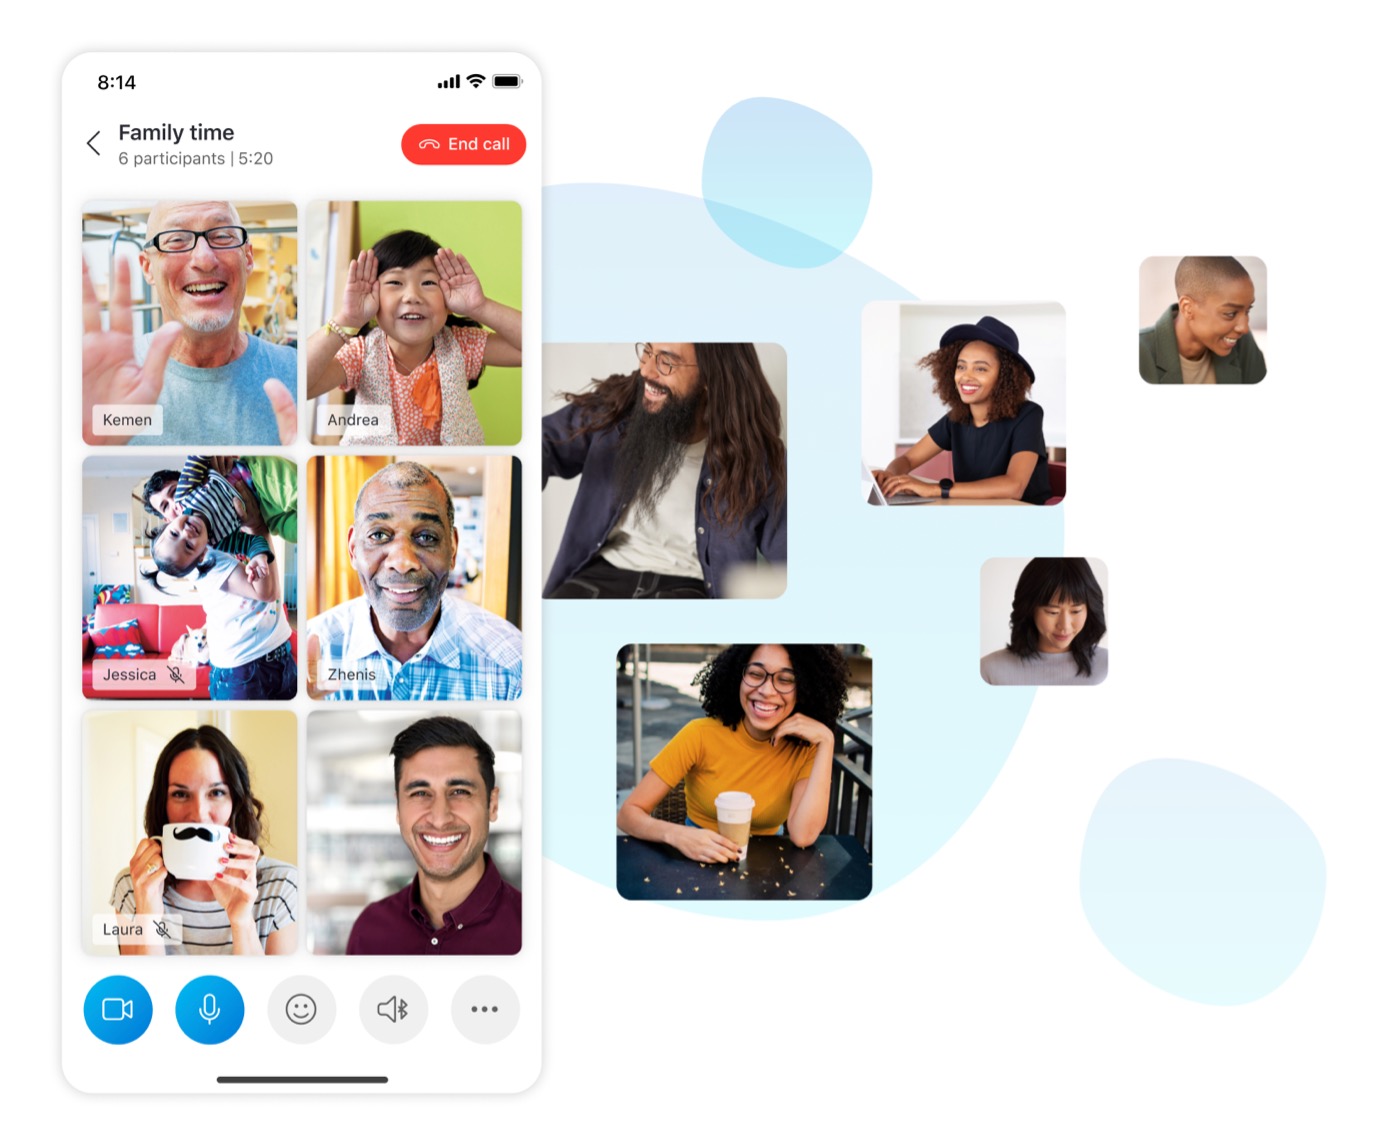 Skype has been redesigned with fresh illustrations, improved performance and new features such as real-time translation, QR code sharing, and personalized news articles in Today tab.